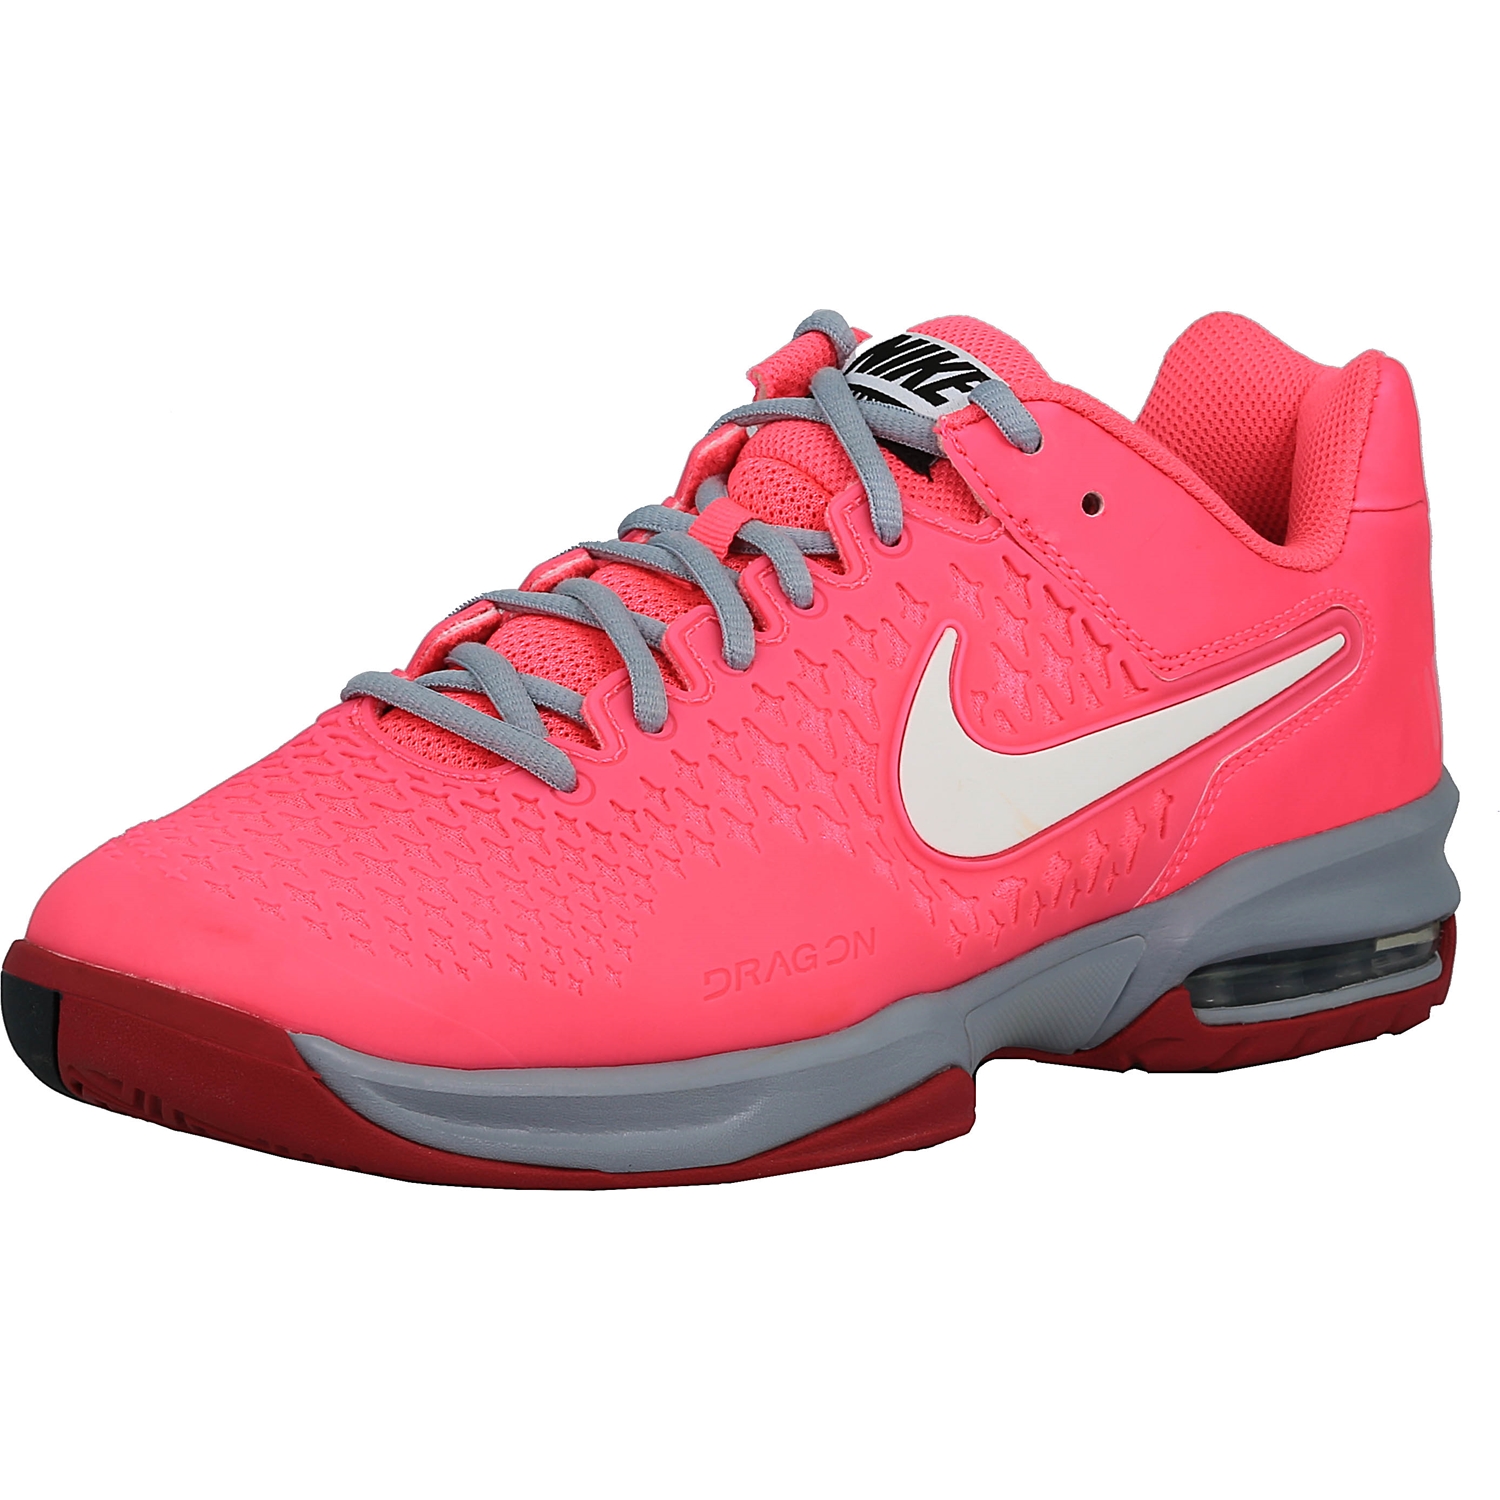 Women's 554874 610 Ankle-High Tennis Shoe - 10.5M - image 1 of 3